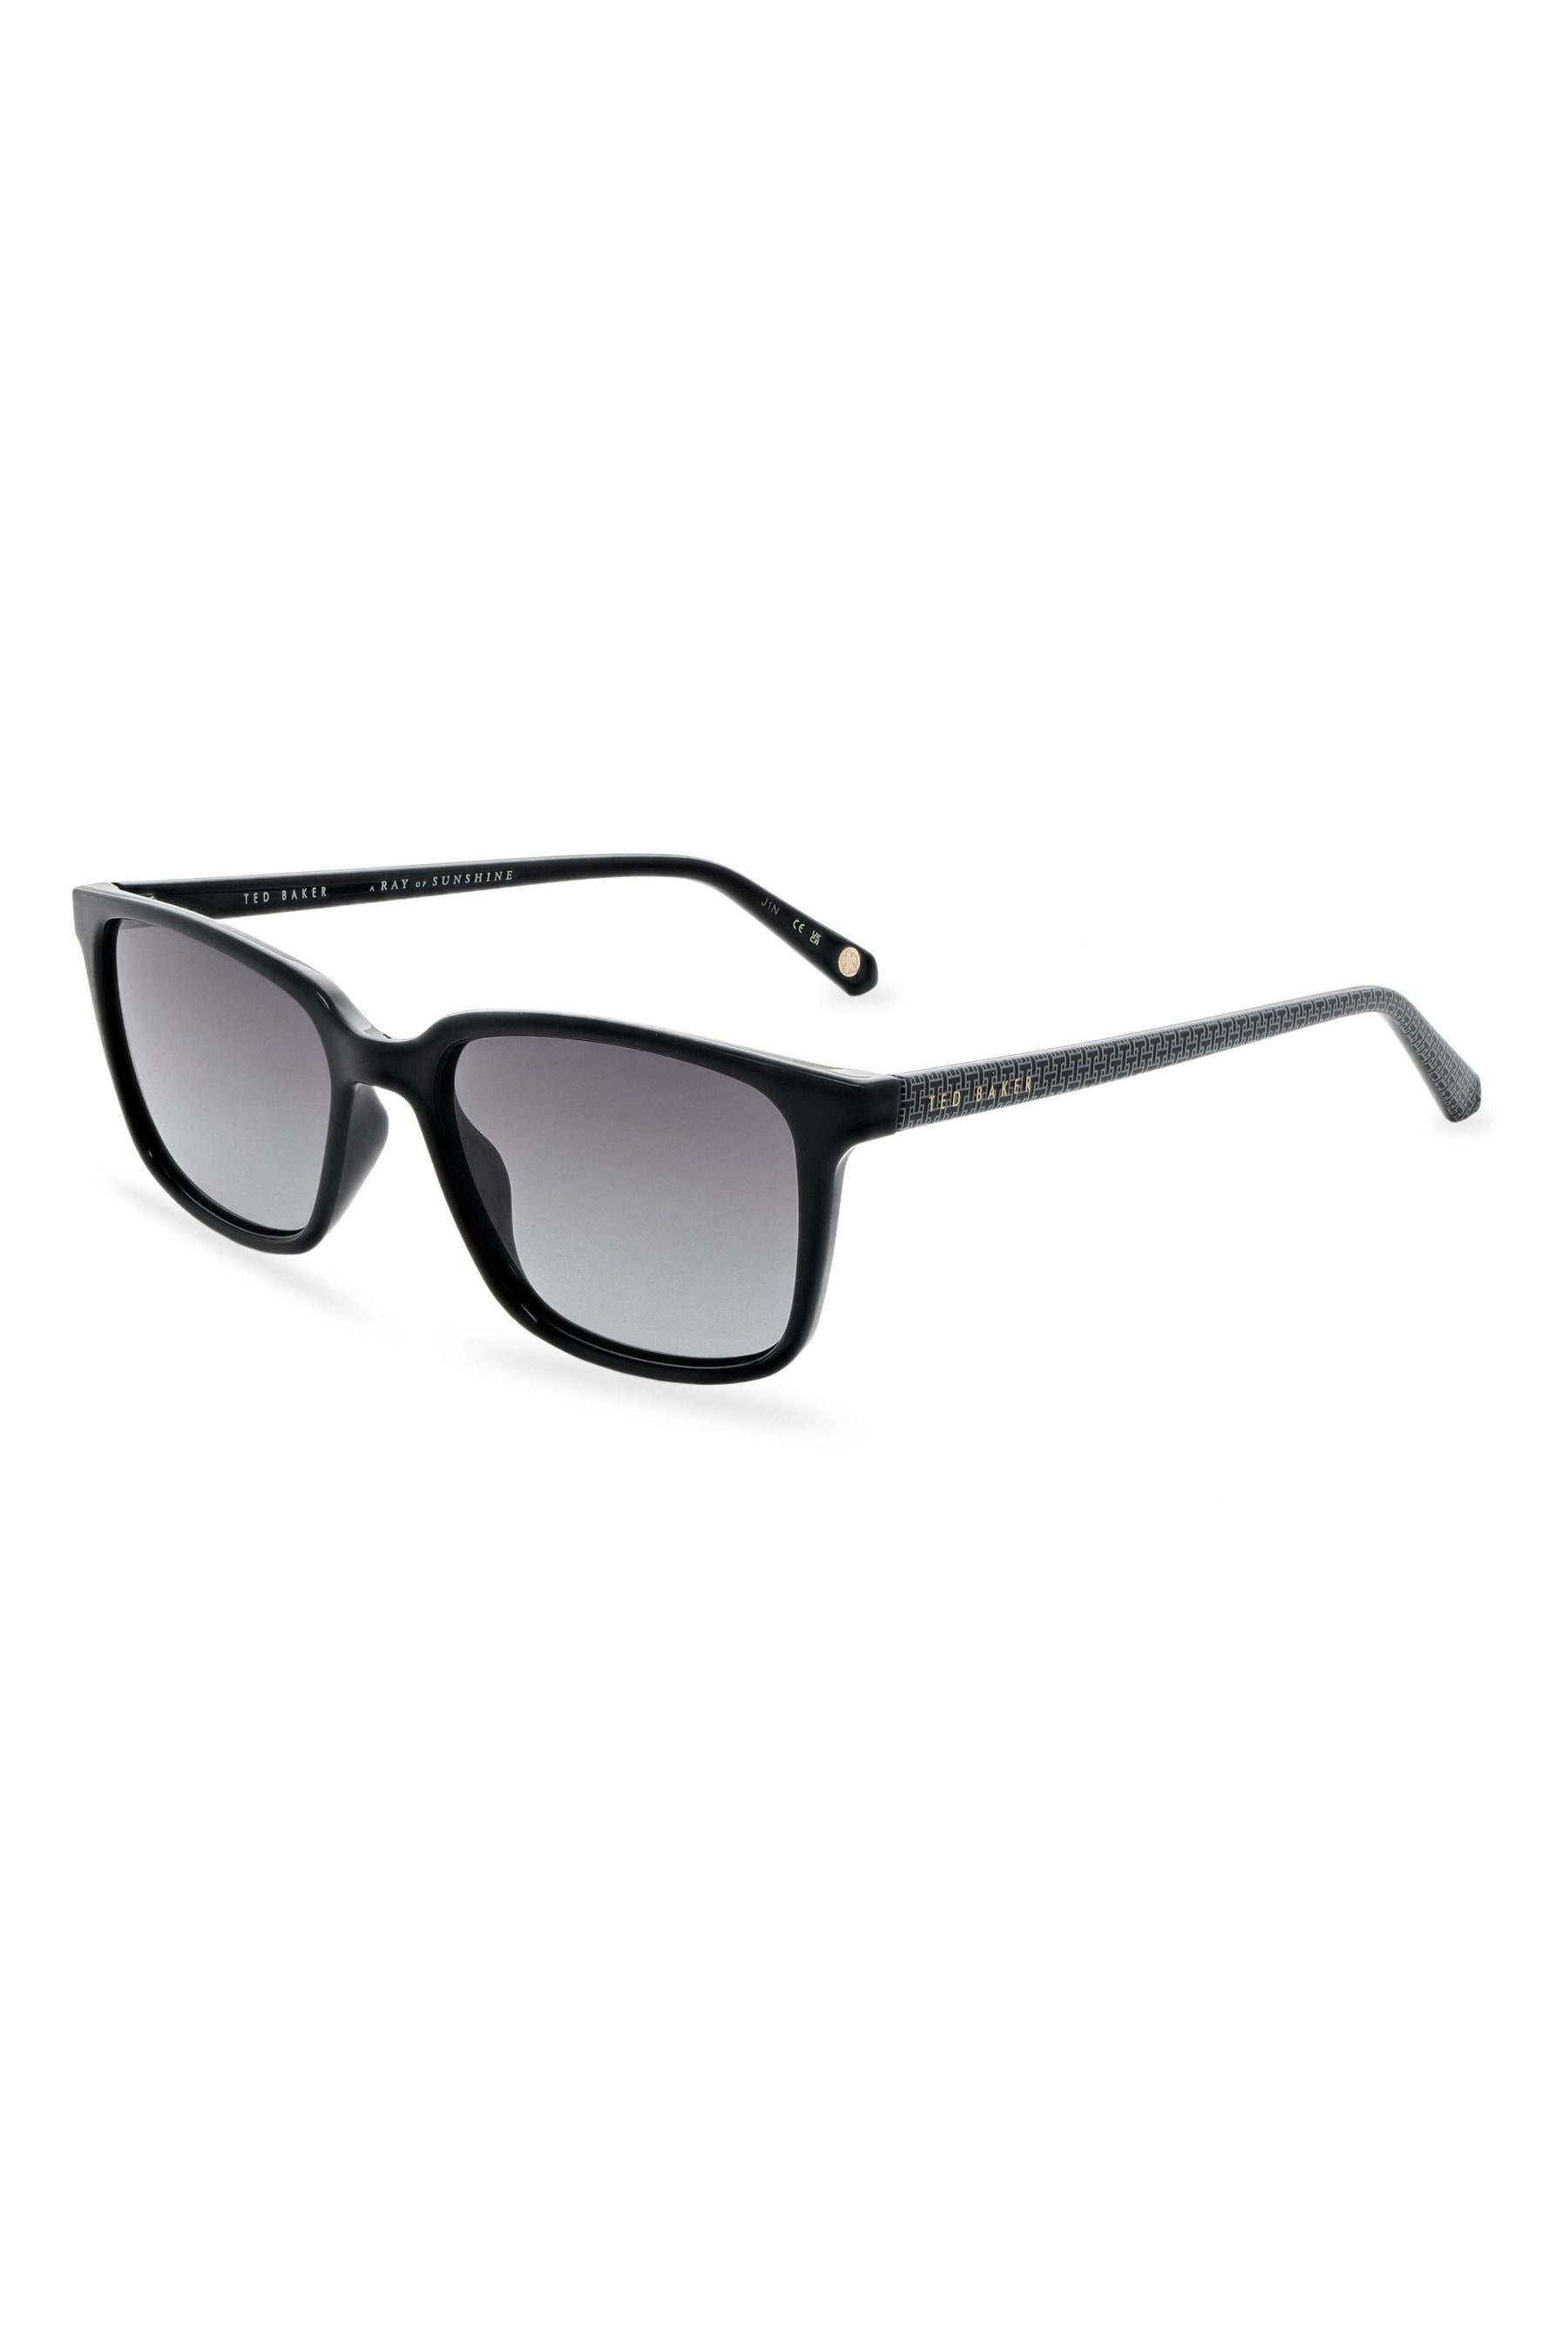 Buy Ted Baker Mens Classic Sunglasses with Contrast Temples from the ...